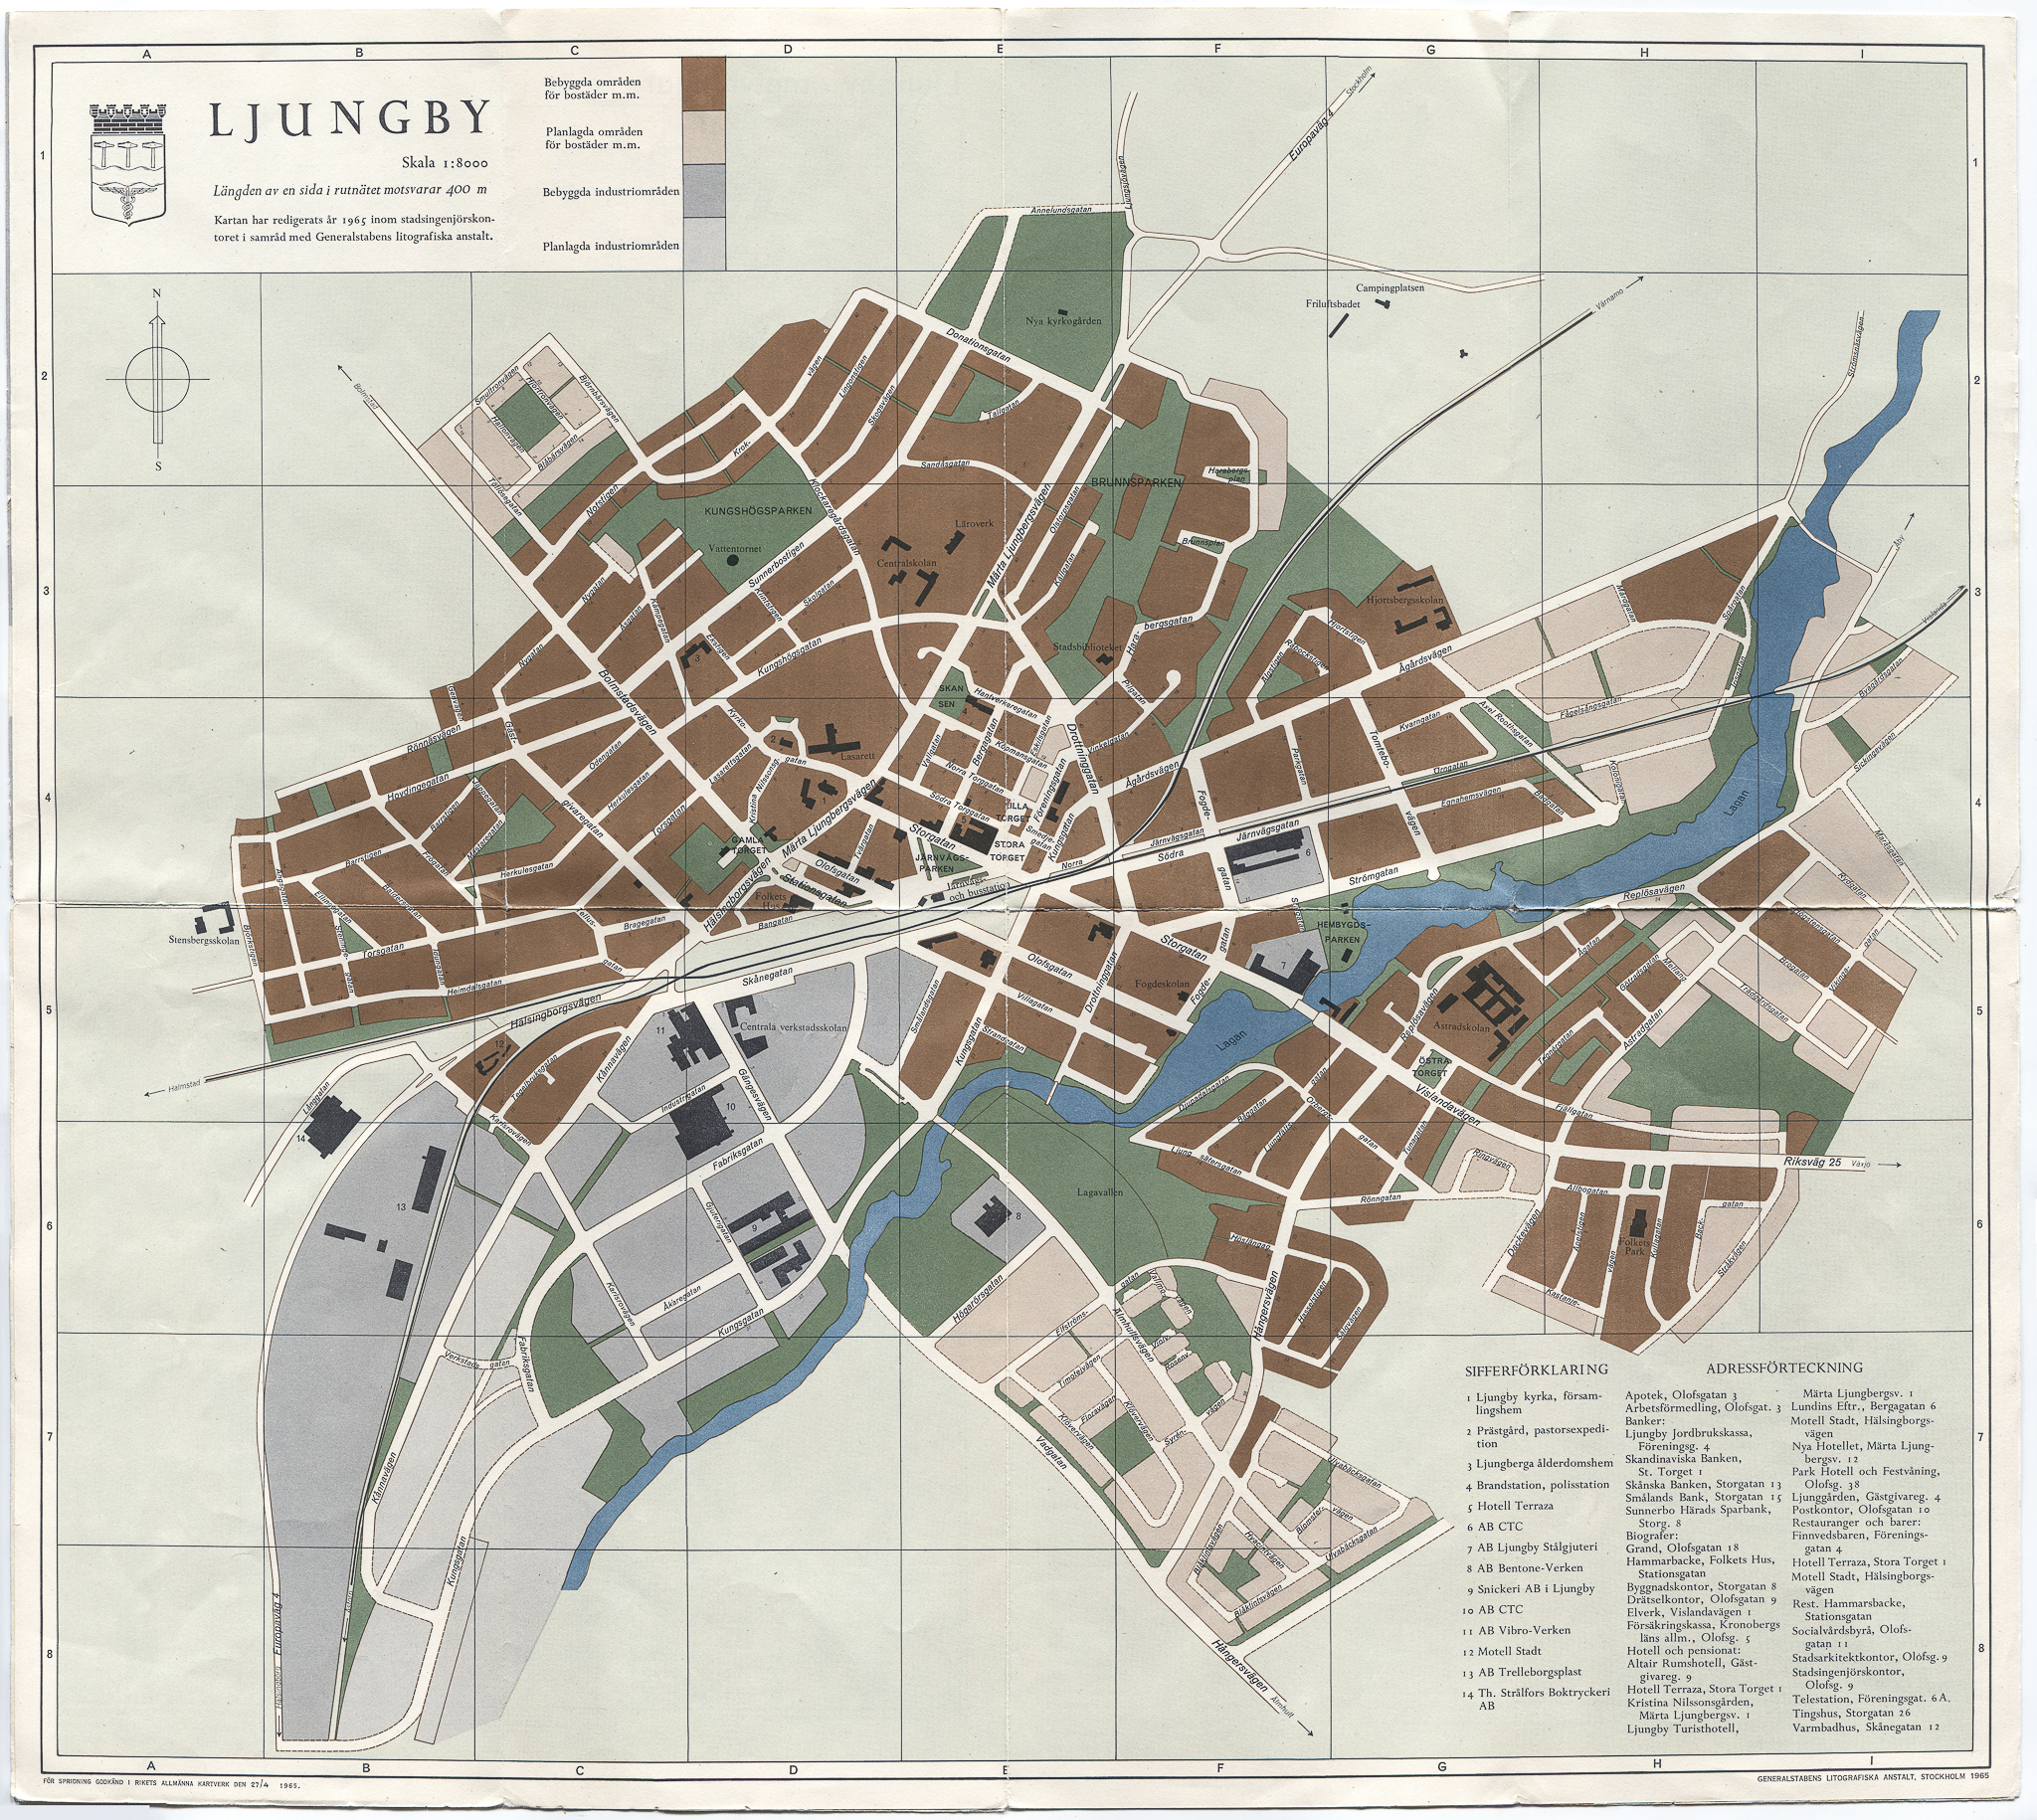 Map of Ljungby, Sweden from 1965